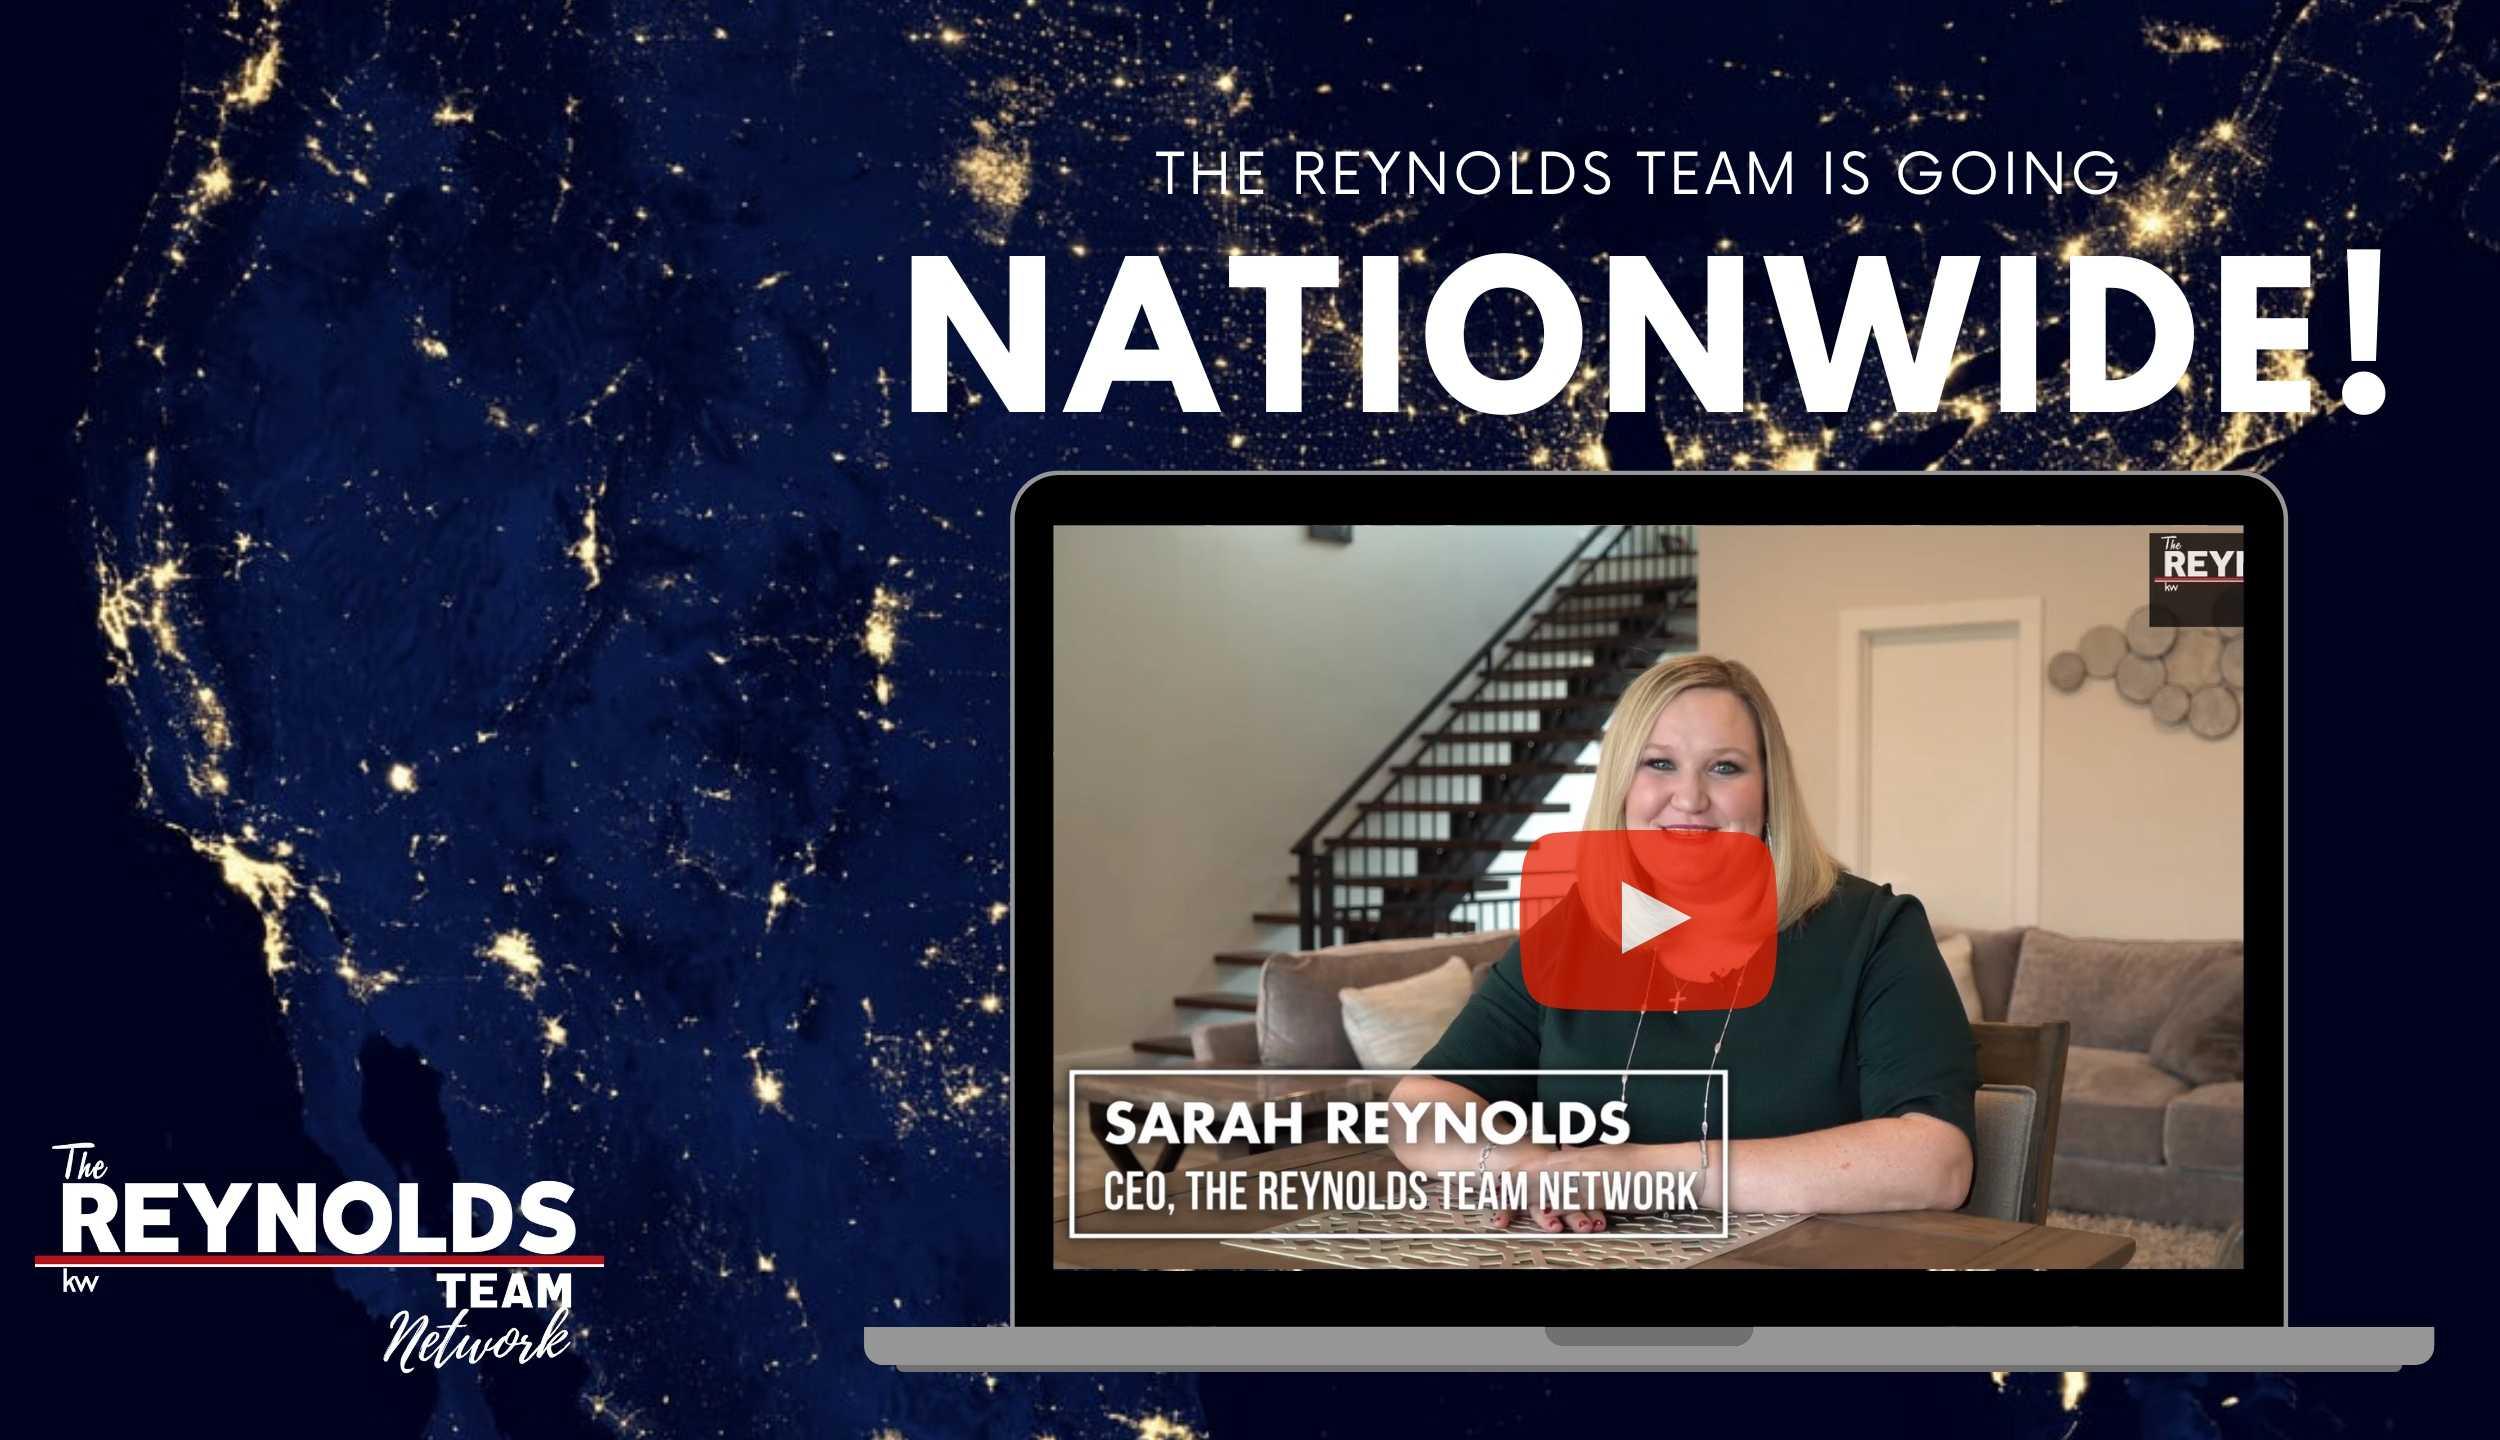 The Reynolds Team is going NATIONWIDE!